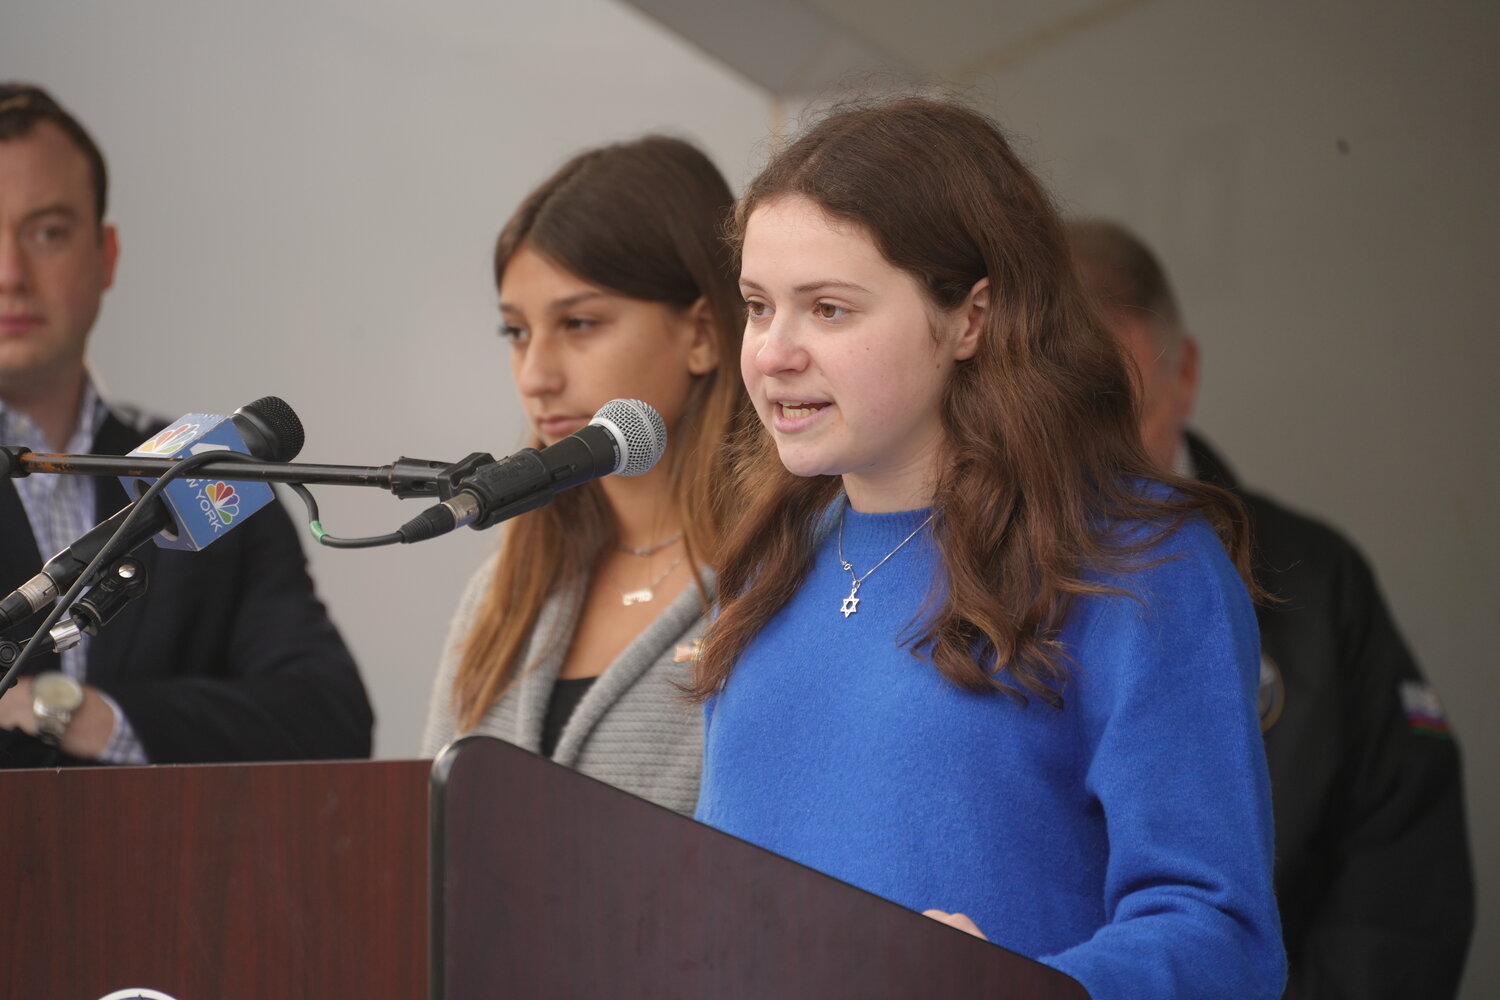 At a student rally for Israel last week, East Meadow’s Sofie Glassman encouraged her peers in the crowd to find their voice and help foster change amid the ongoing conflict in the Middle East and the rise of antisemitism across the globe.